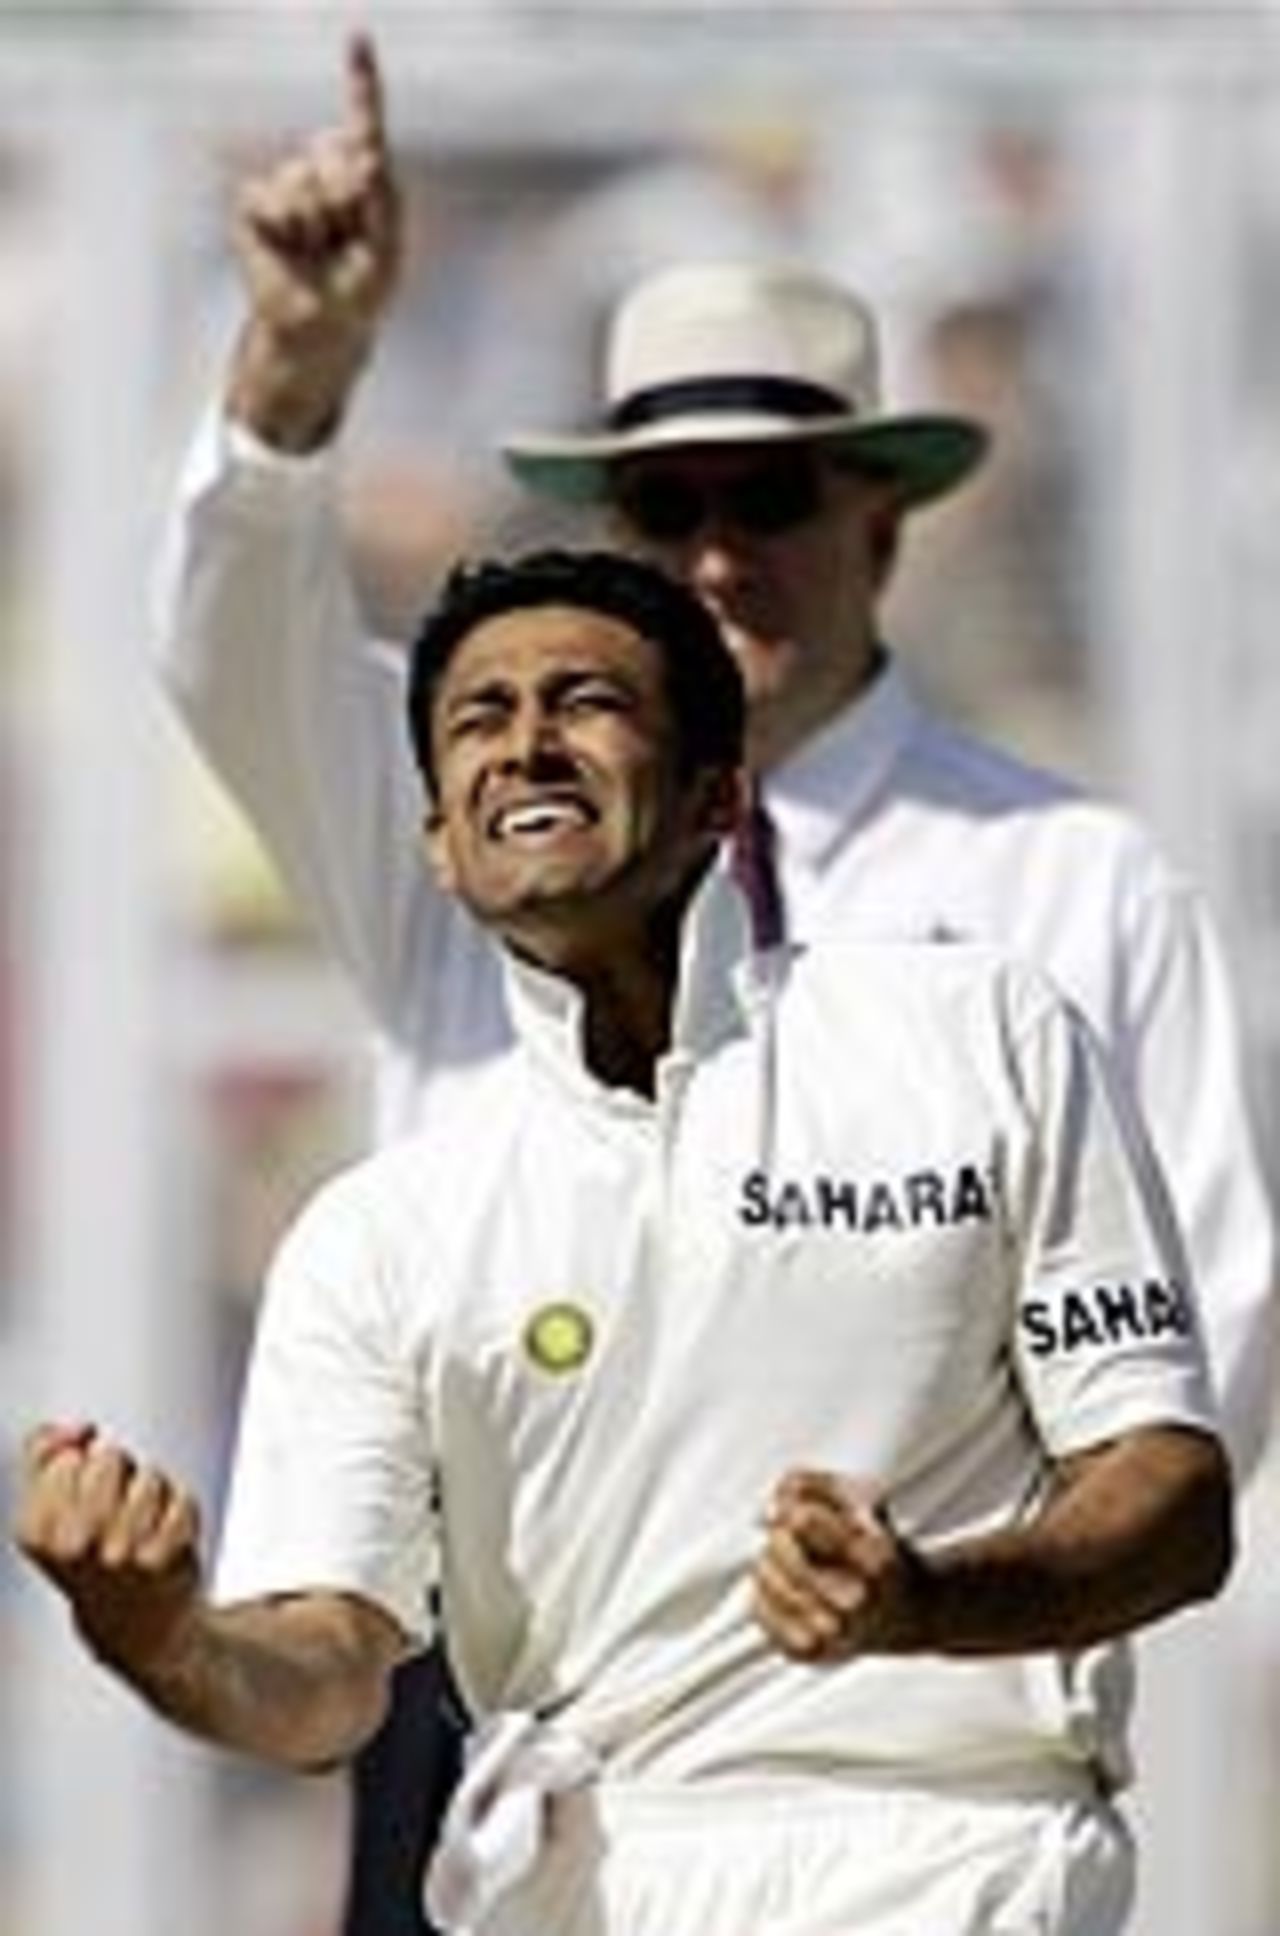 Anil Kumble ecstatic after picking the wicket of Inzamam-ul-Haq, India v Pakistan, 1st Test, Mohali, March 11, 2005